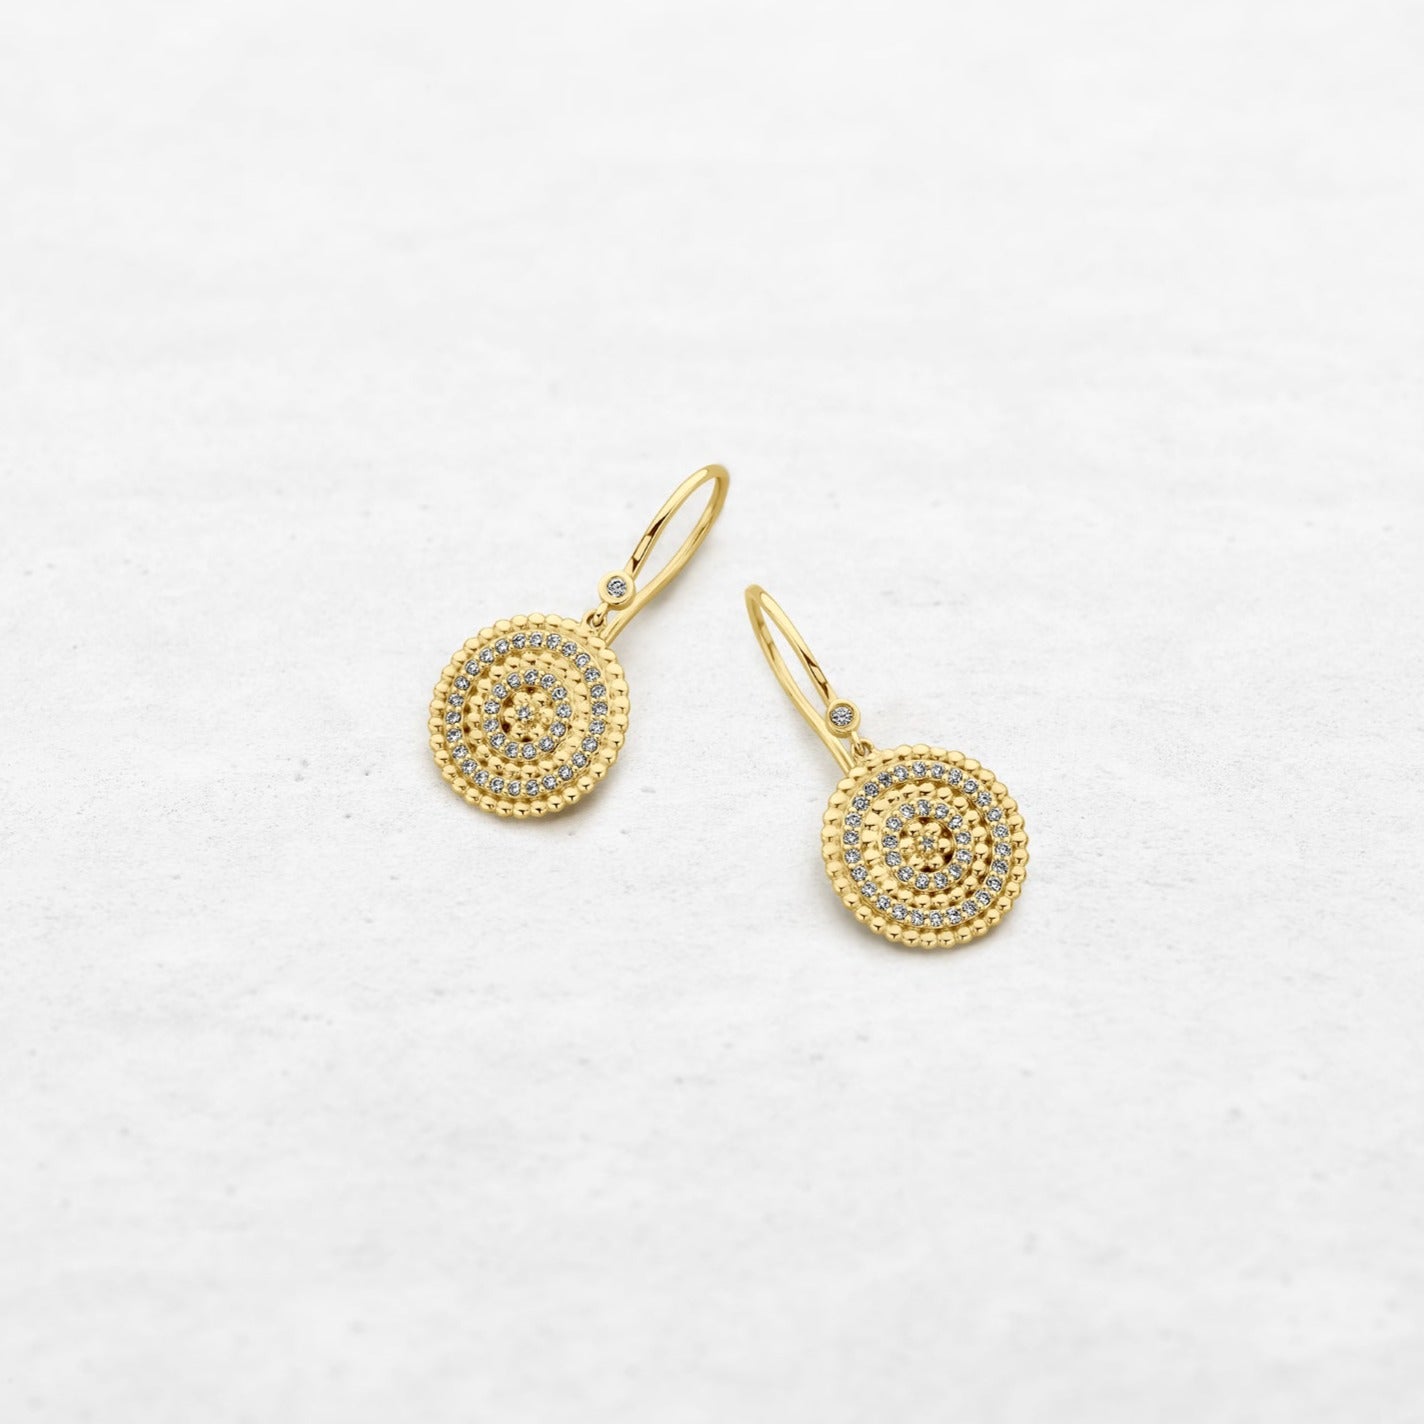 Earrings with circular plateau in gold and diamonds in yellow gold made by O! Jewelry